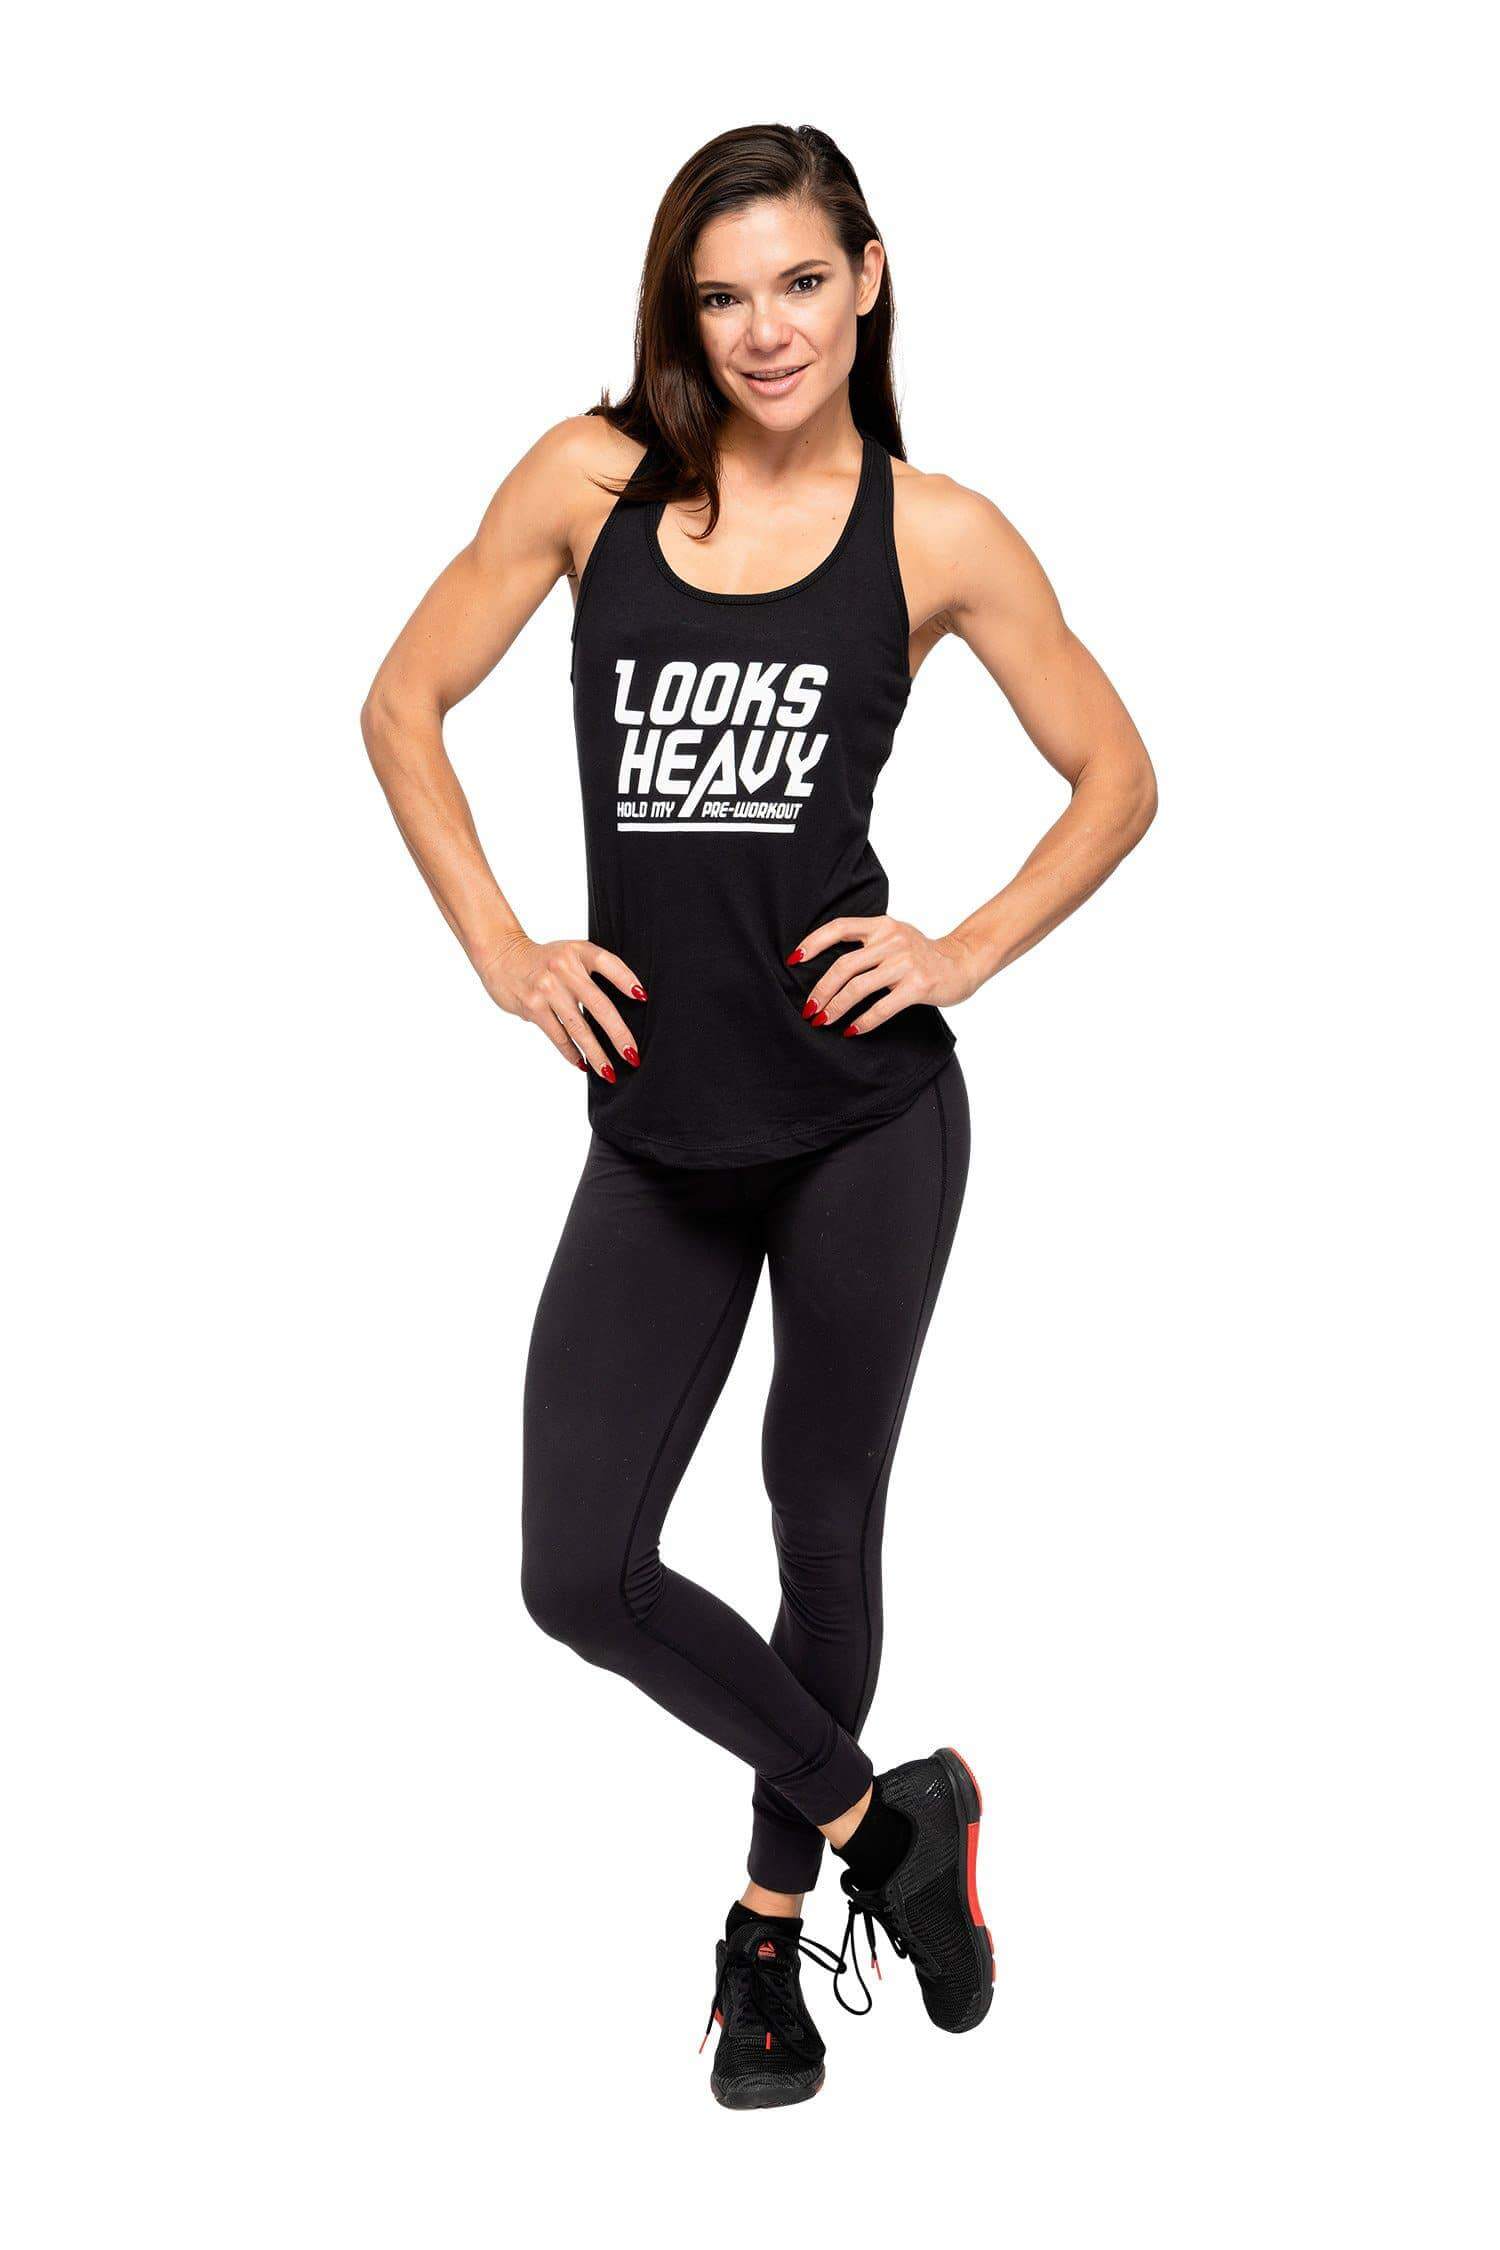 Looks Heavy Women's Racerback Tank top – Strong and Humble Apparel